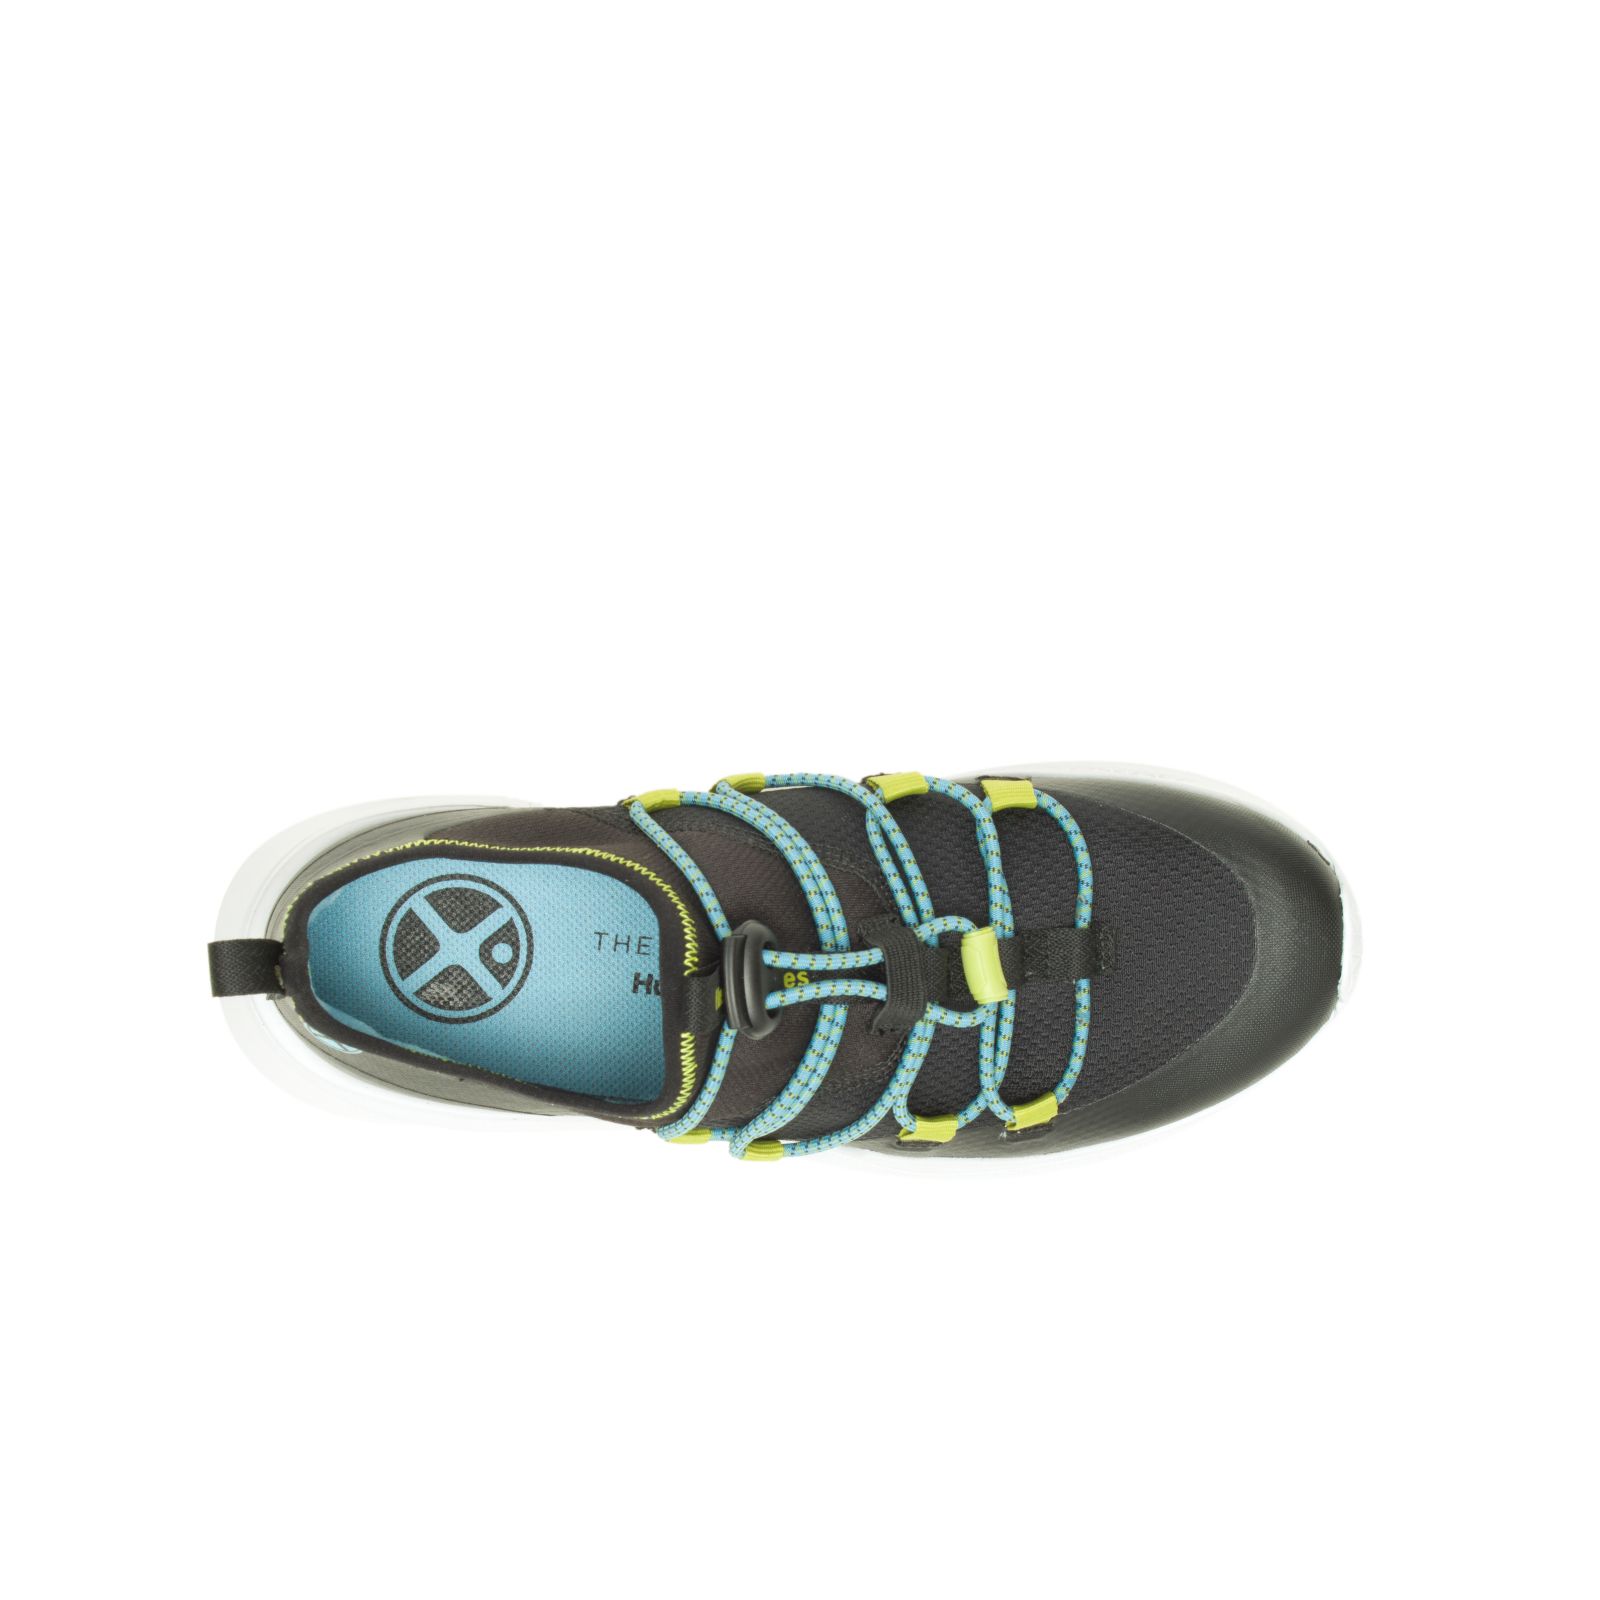 Tenis Hush Puppies Spark Bungee Mujer Negros | GHWCIOR-87